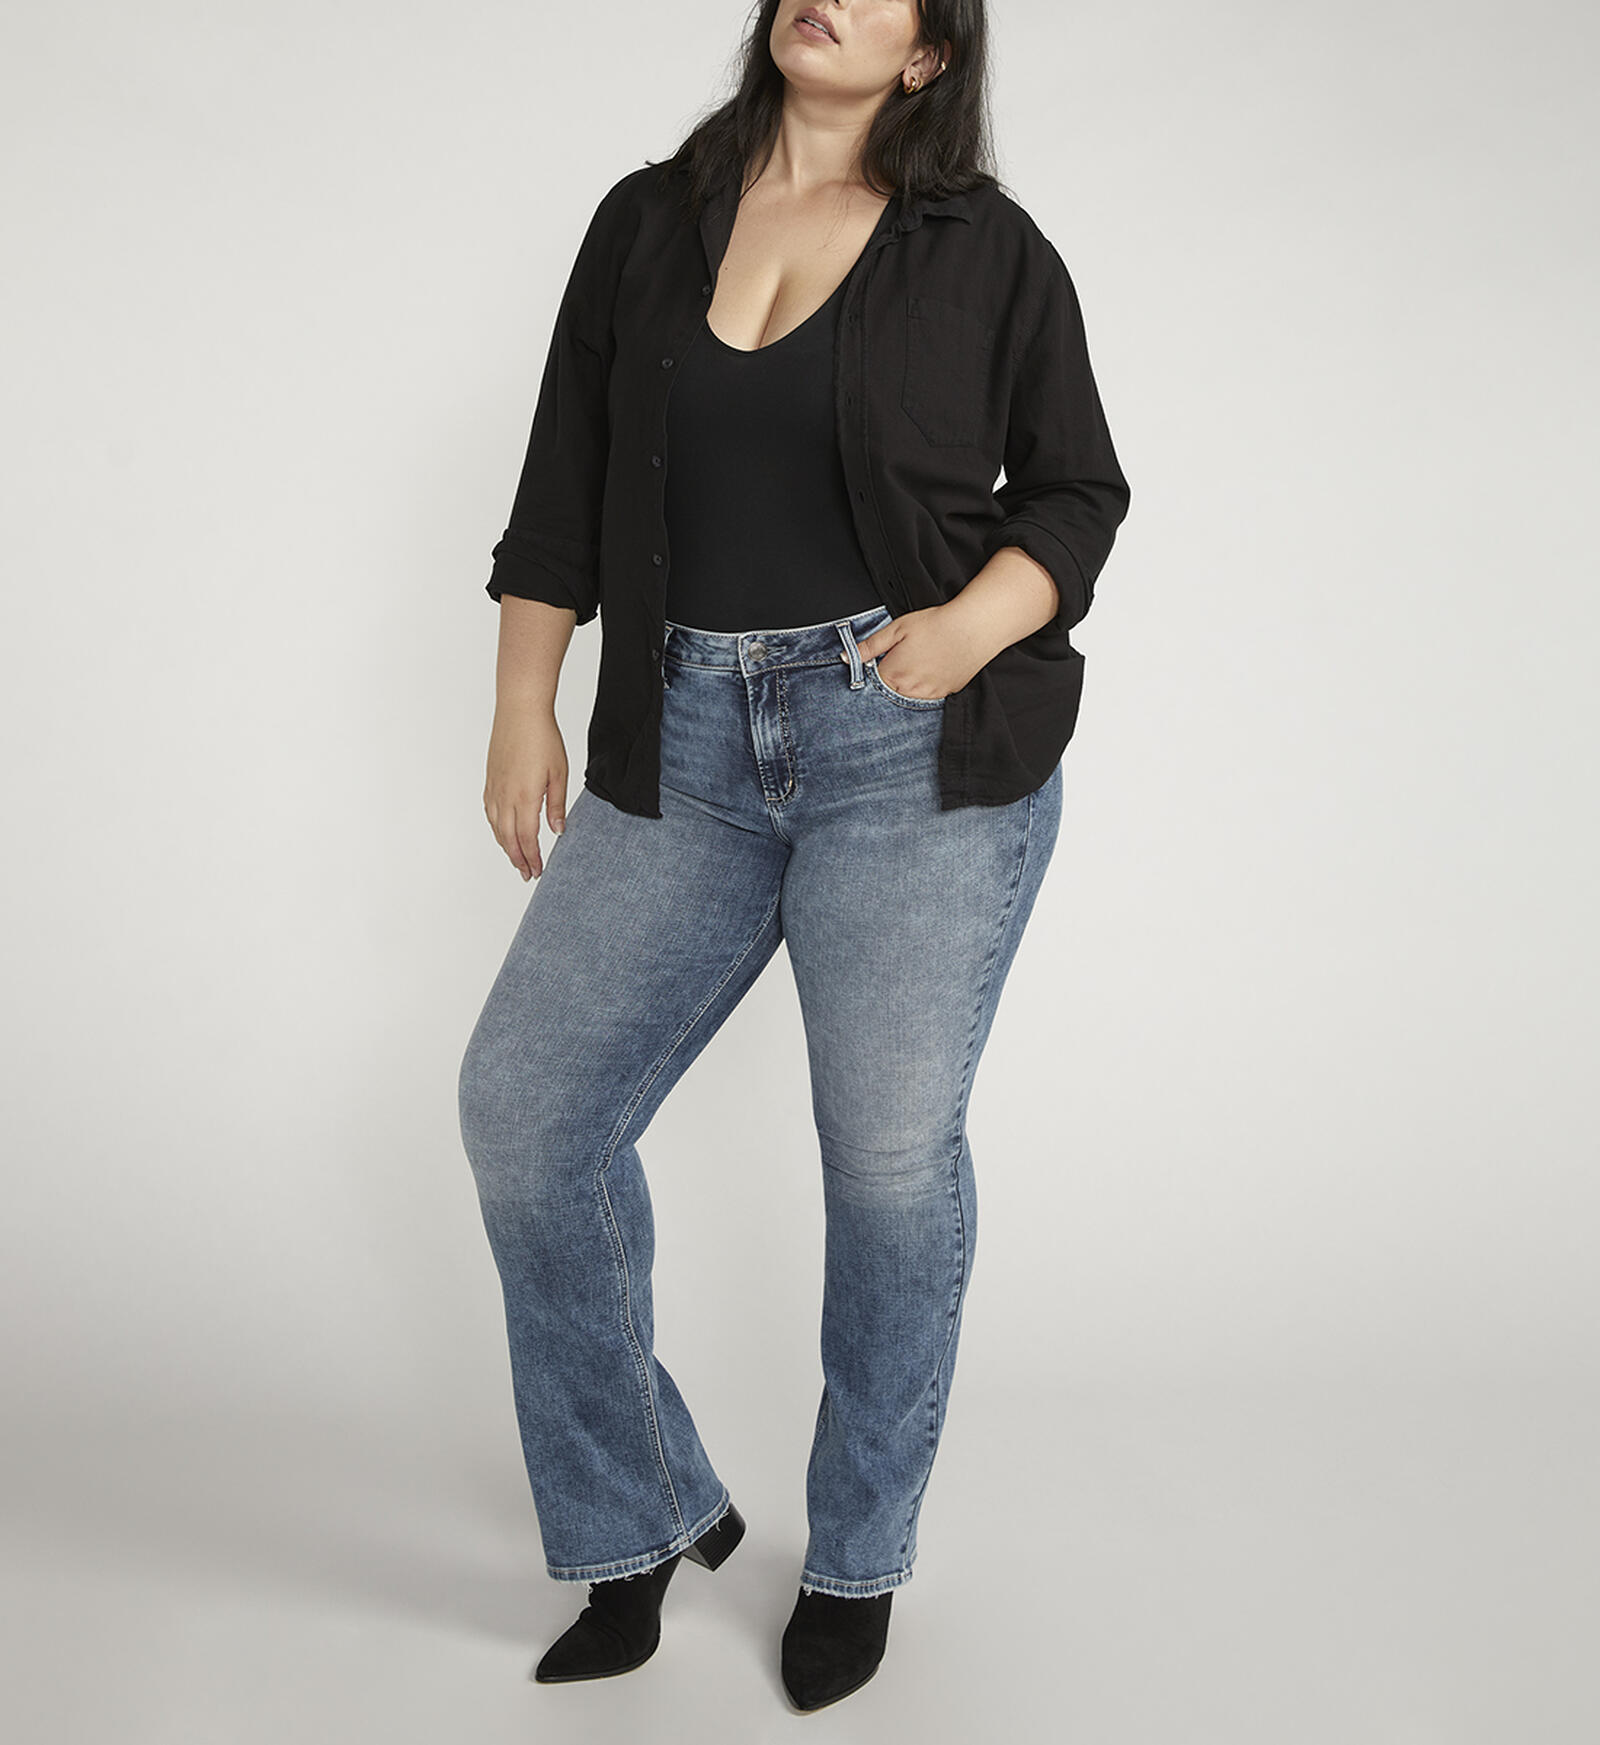 Plus-Size Clothing Options for Women on the Rise